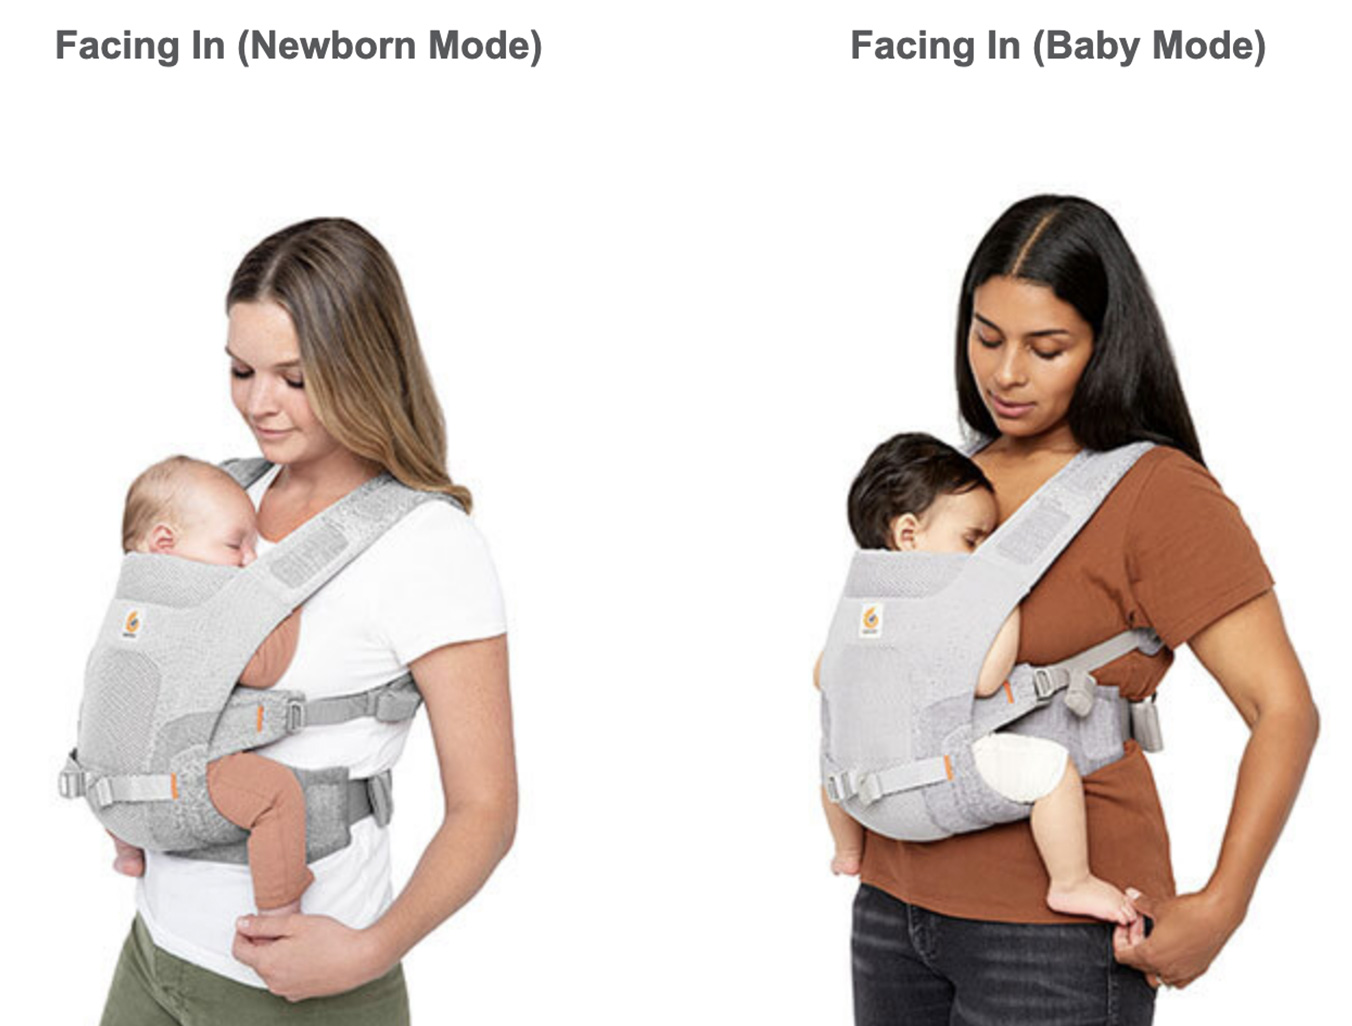 Carry Modes - Facing In Newborn Mode, Facing In Baby Mode.